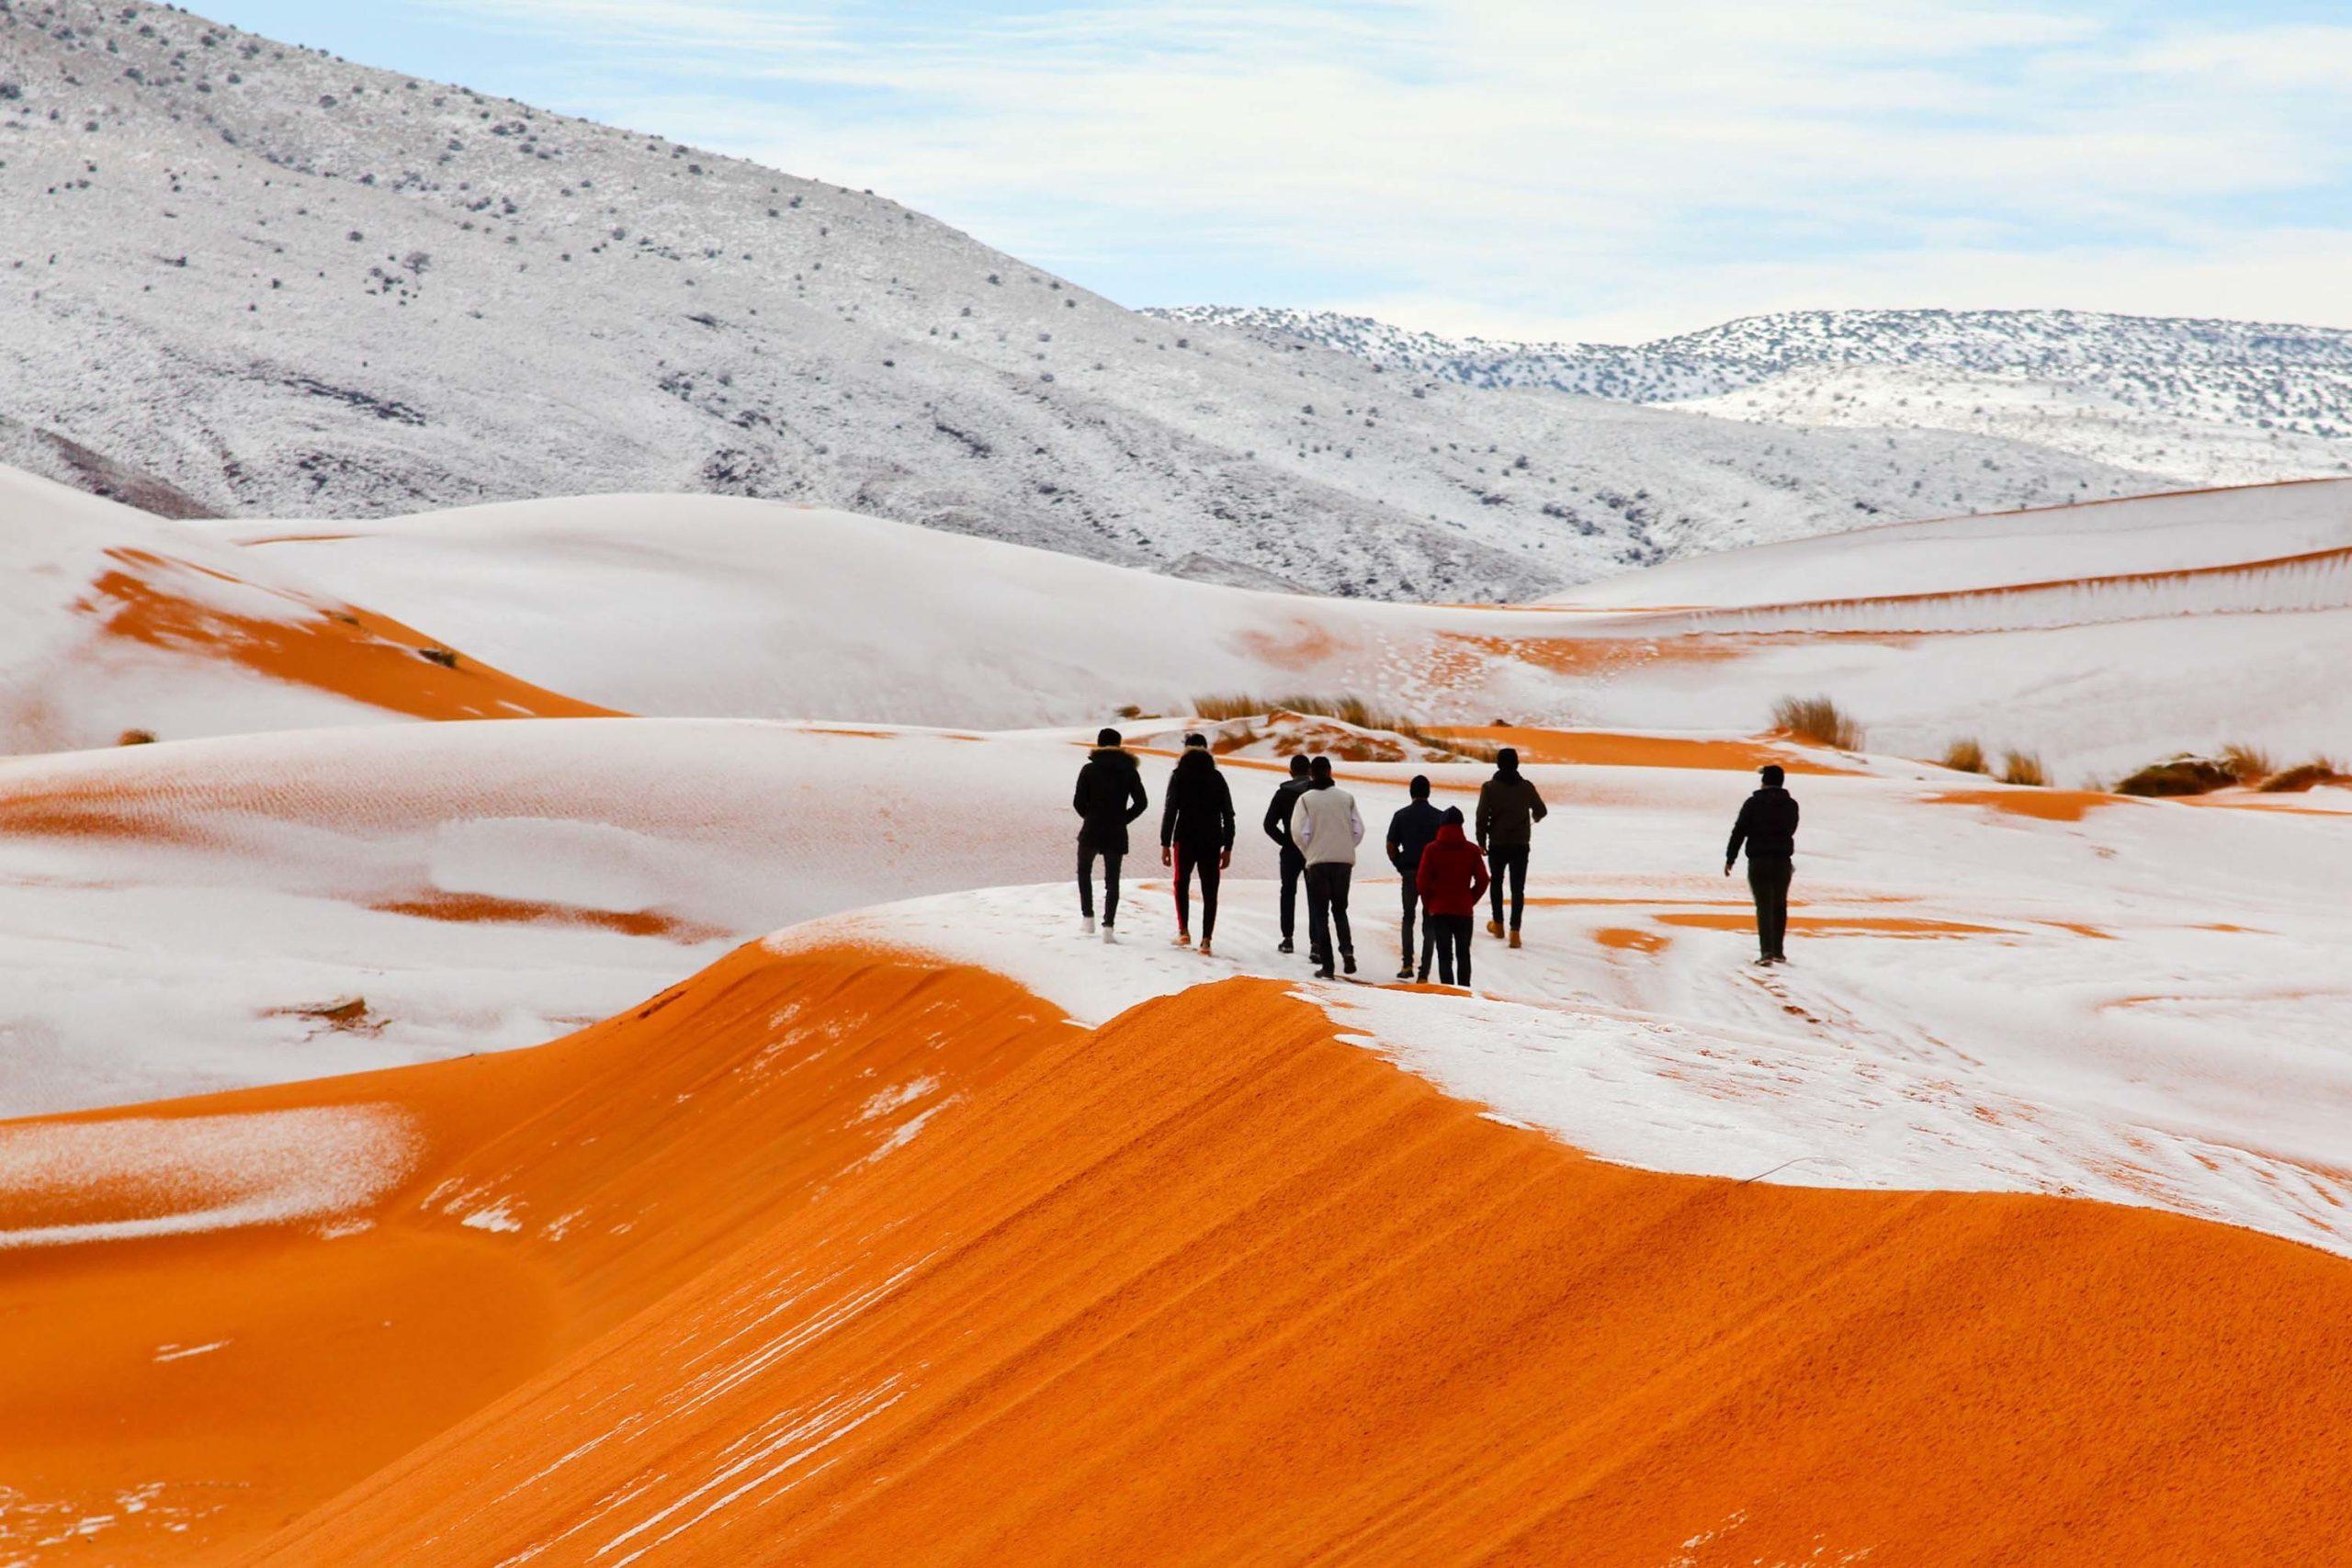 Mandatory Credit: Photo by Geoff Robinson Photography/REX/Shutterstock (9309883af) Snow in the Sahara Desert near the town of Ain Sefra, Algeria Snow in the Sahara Desert - 07 Jan 2018 *Full story: https://www.rexfeatures.com/nanolink/tvw5 As much of the northern hemisphere sees record cold temperatures, the SAHARA Desert has been hit by SNOW for the second time in four decades. Photographers have taken incredible pictures of 40cm deep snow covering the sand in the small Saharan desert town of Ain Sefra after a freak winter storm yesterday (Sun). The town in the world's HOTTEST desert had not seen snow for 37 years when it arrived this time last year and locals were stunned when it began falling on the red sand dunes yesterday morning. Snow started falling in the early hours of Sunday morning and it quickly began settling on the sand. Photographer Karim Bouchetata said: "We were really surprised when we woke up to see snow again. It stayed all day on Sunday and began melting at around 5pm."